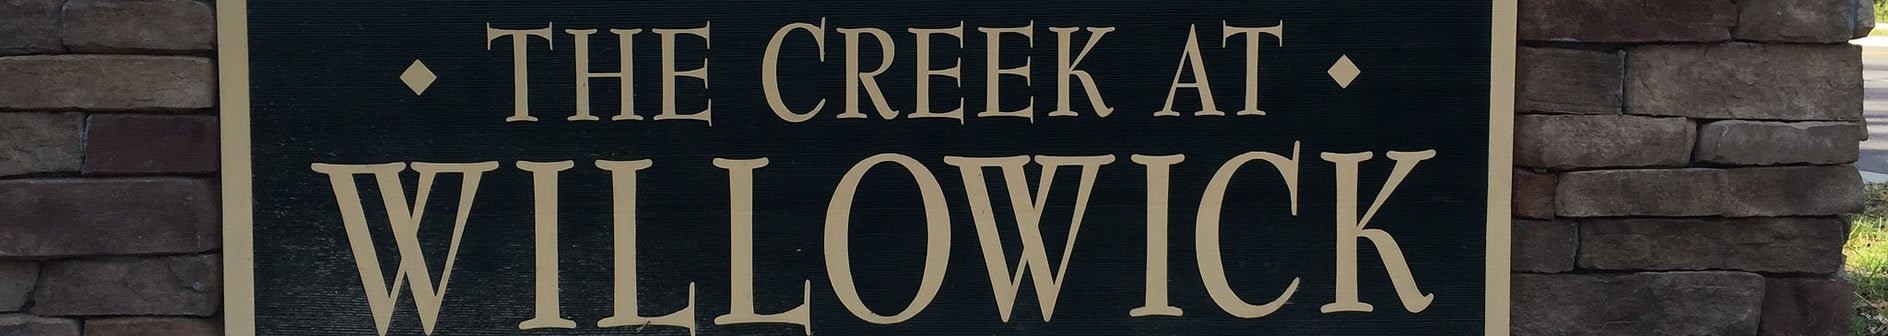 The Creek at Willowick sign in Wilmington